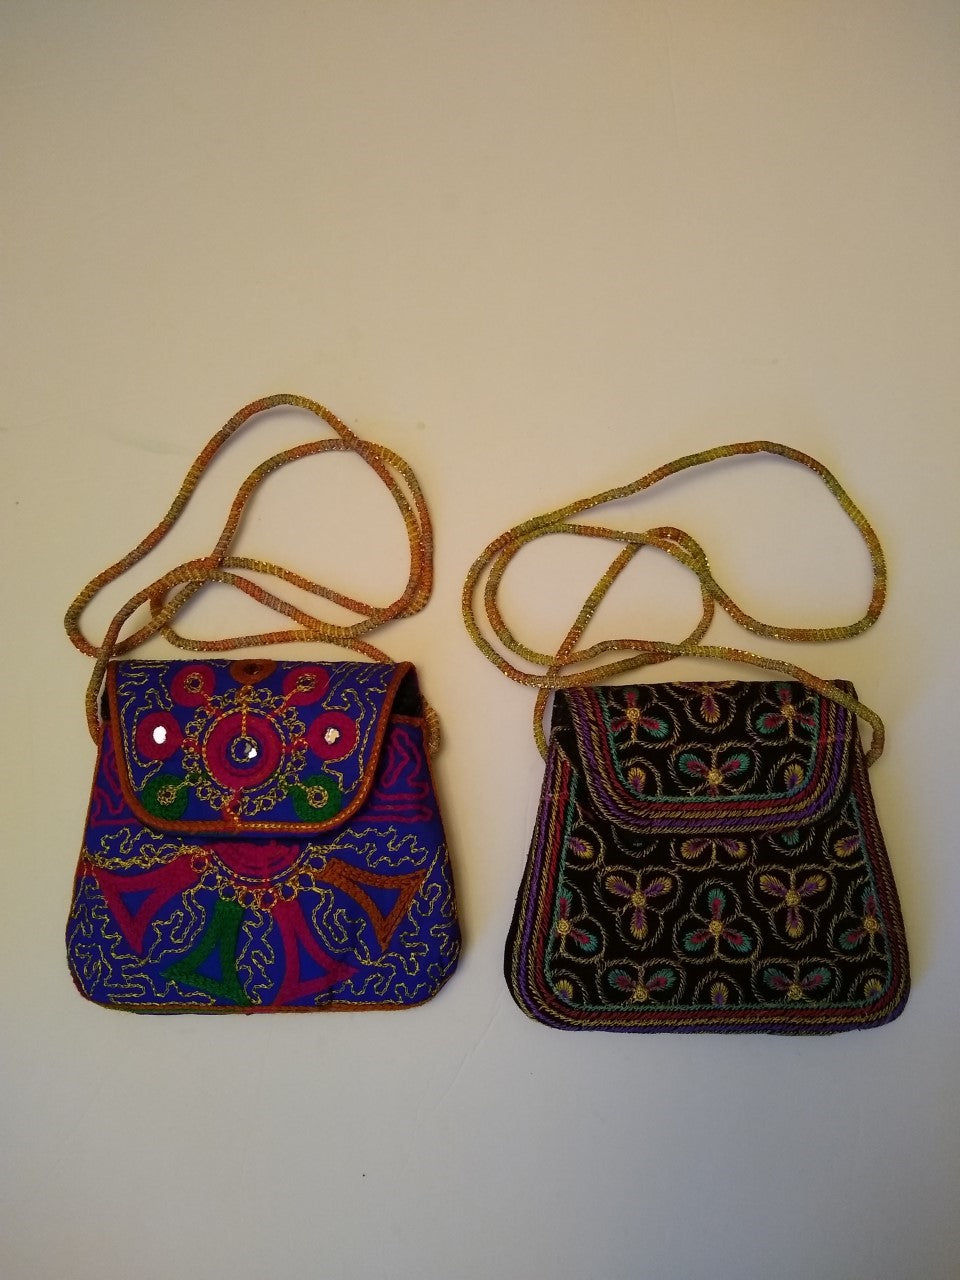 3 Pcs. of TRADITIONAL SINDHI CLUTCH BAG (Handmade/Hand Crafted)  # 2SSCP